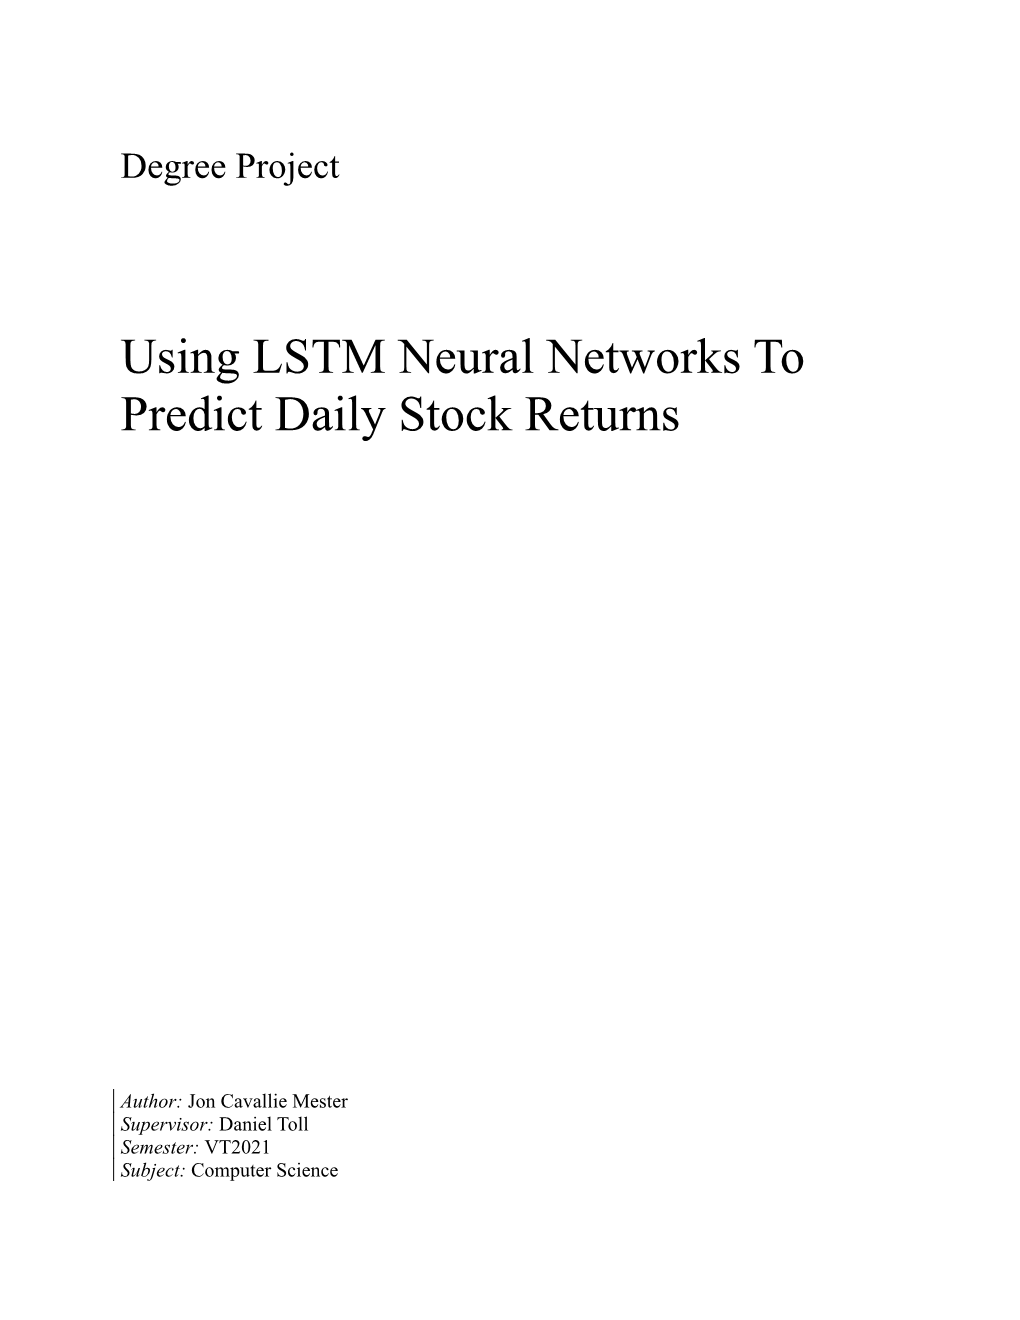 Using LSTM Neural Networks to Predict Daily Stock Returns